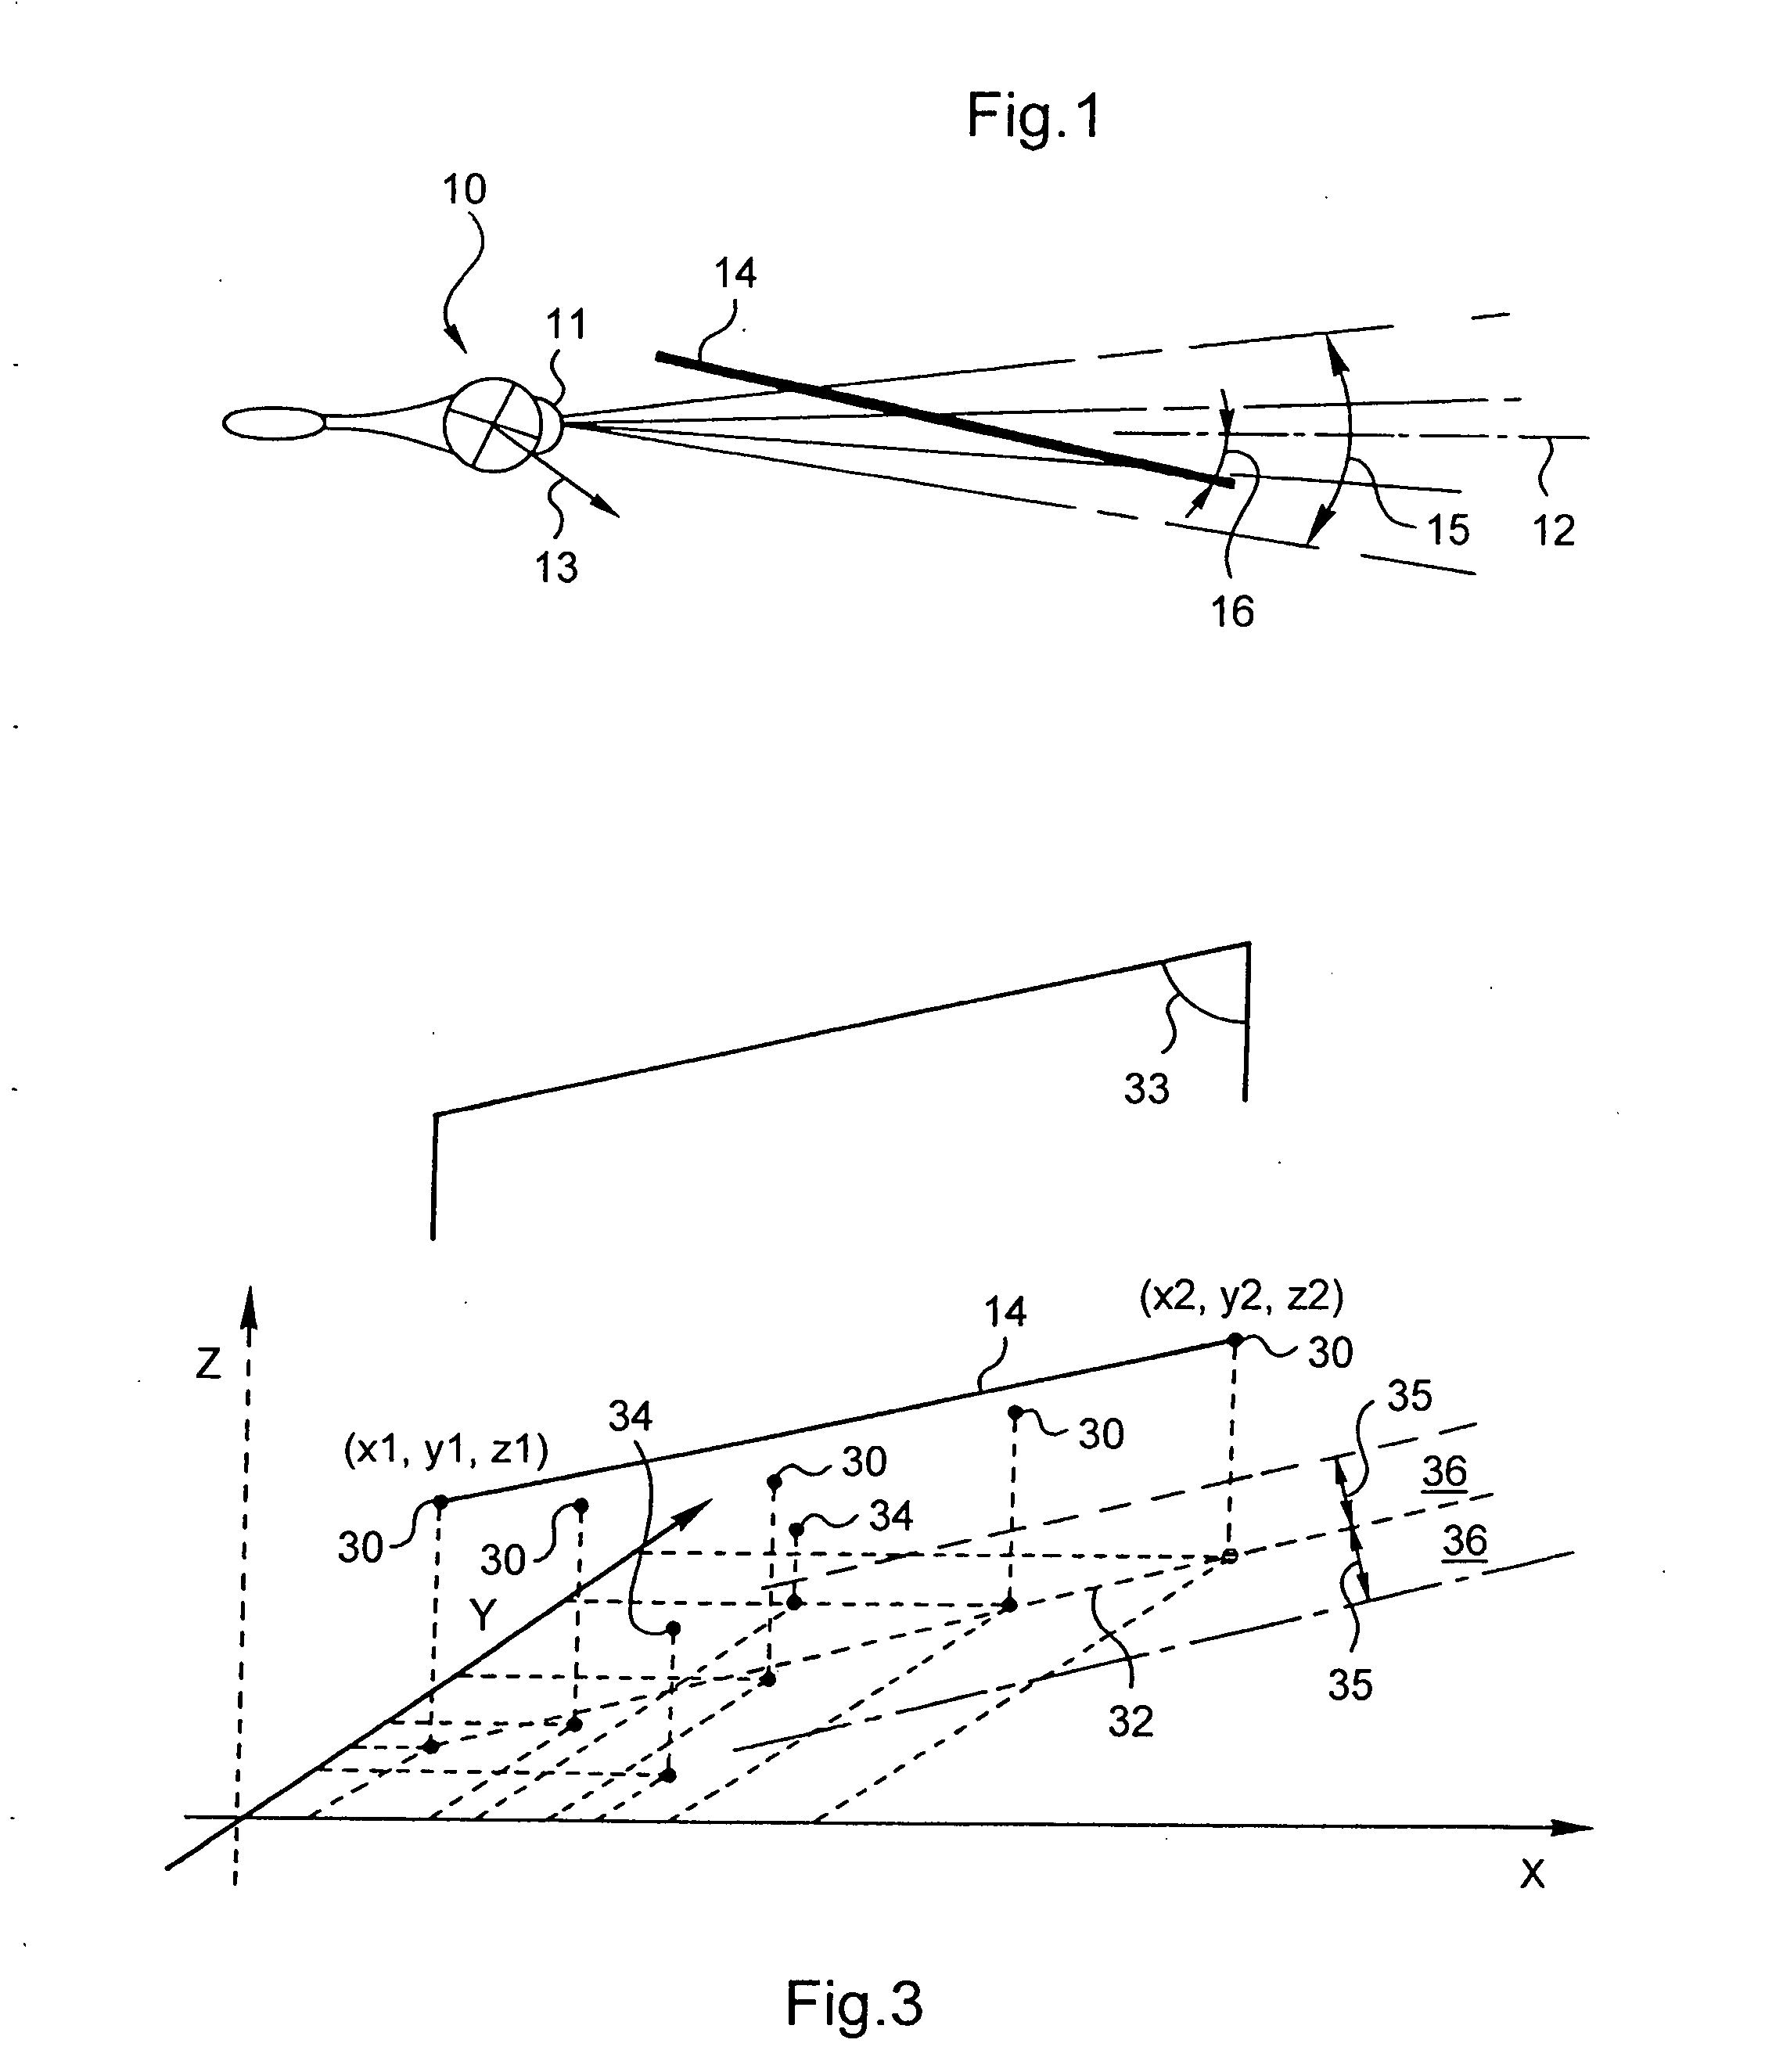 Method of Detecting Suspended Filamentary Objects by Telemetry